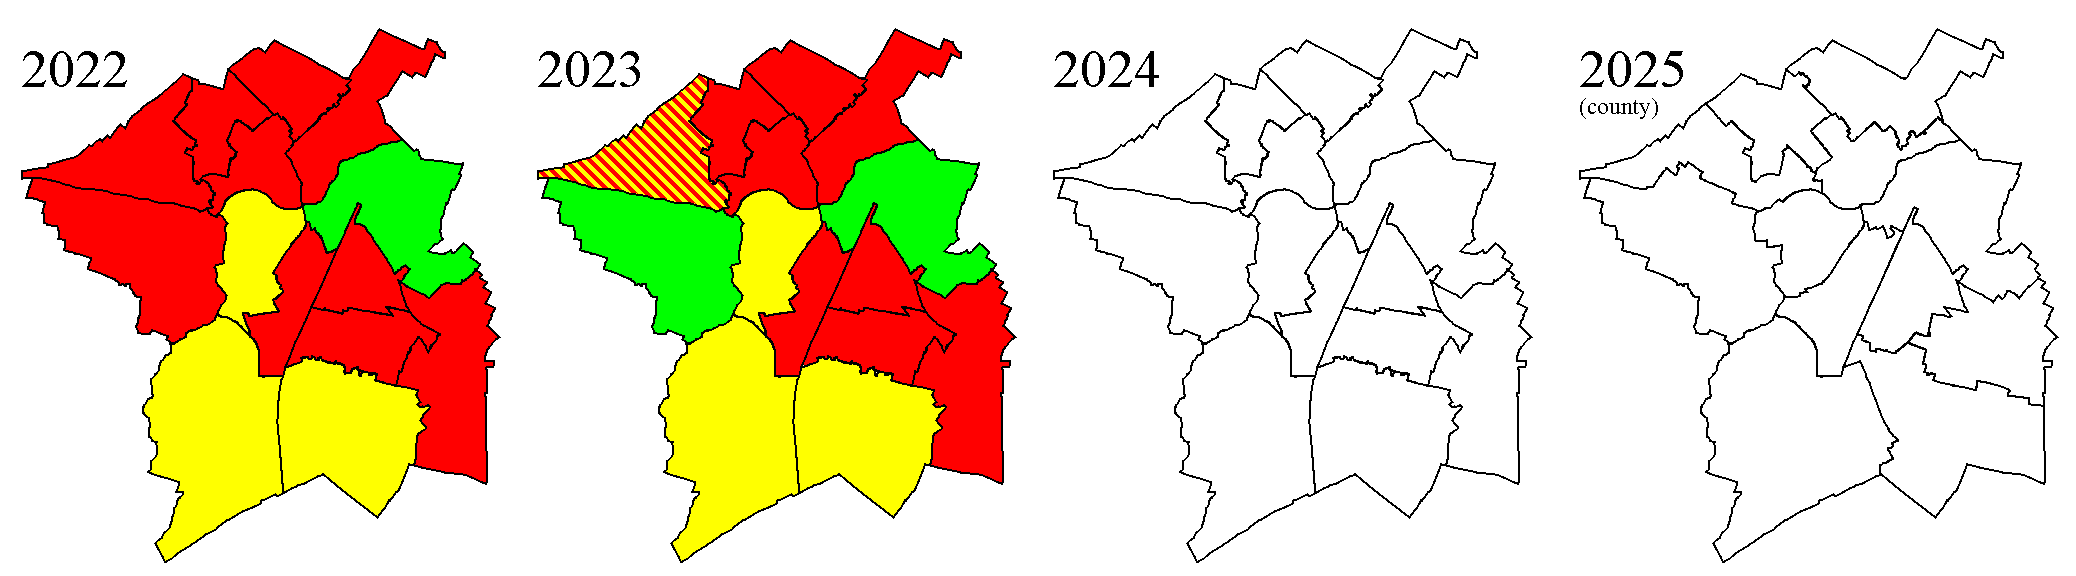 results 2022 to 2025